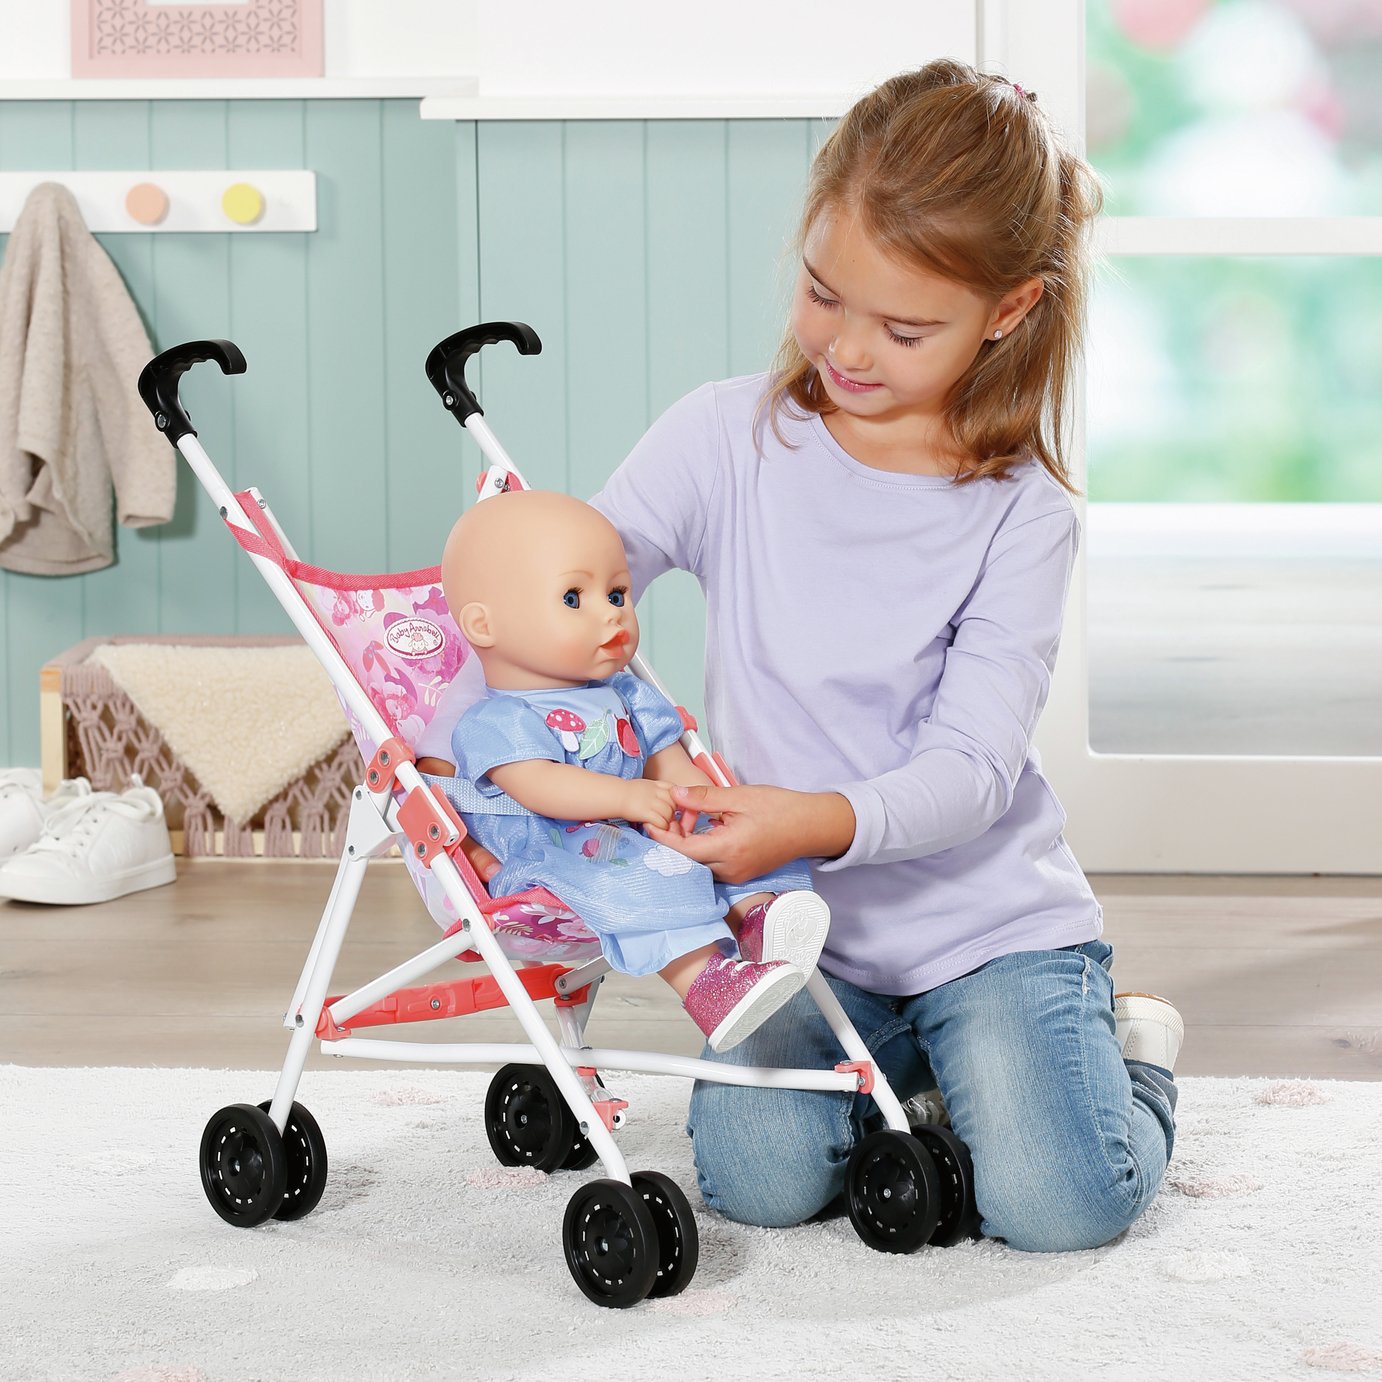 Baby Annabell Dolls Stroller Review